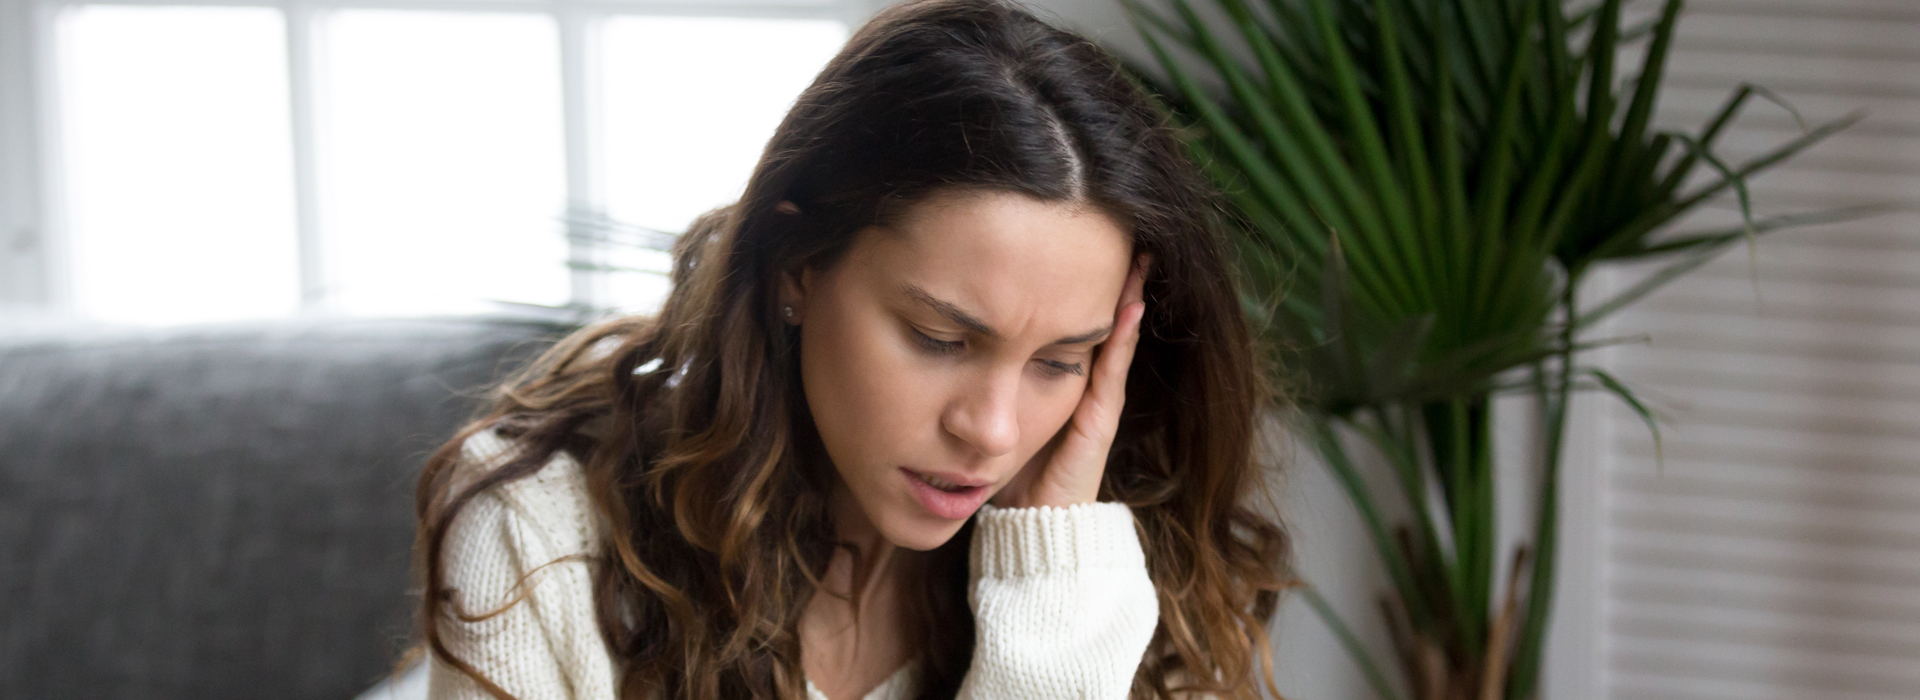 What You Should Know About Mood Disorders